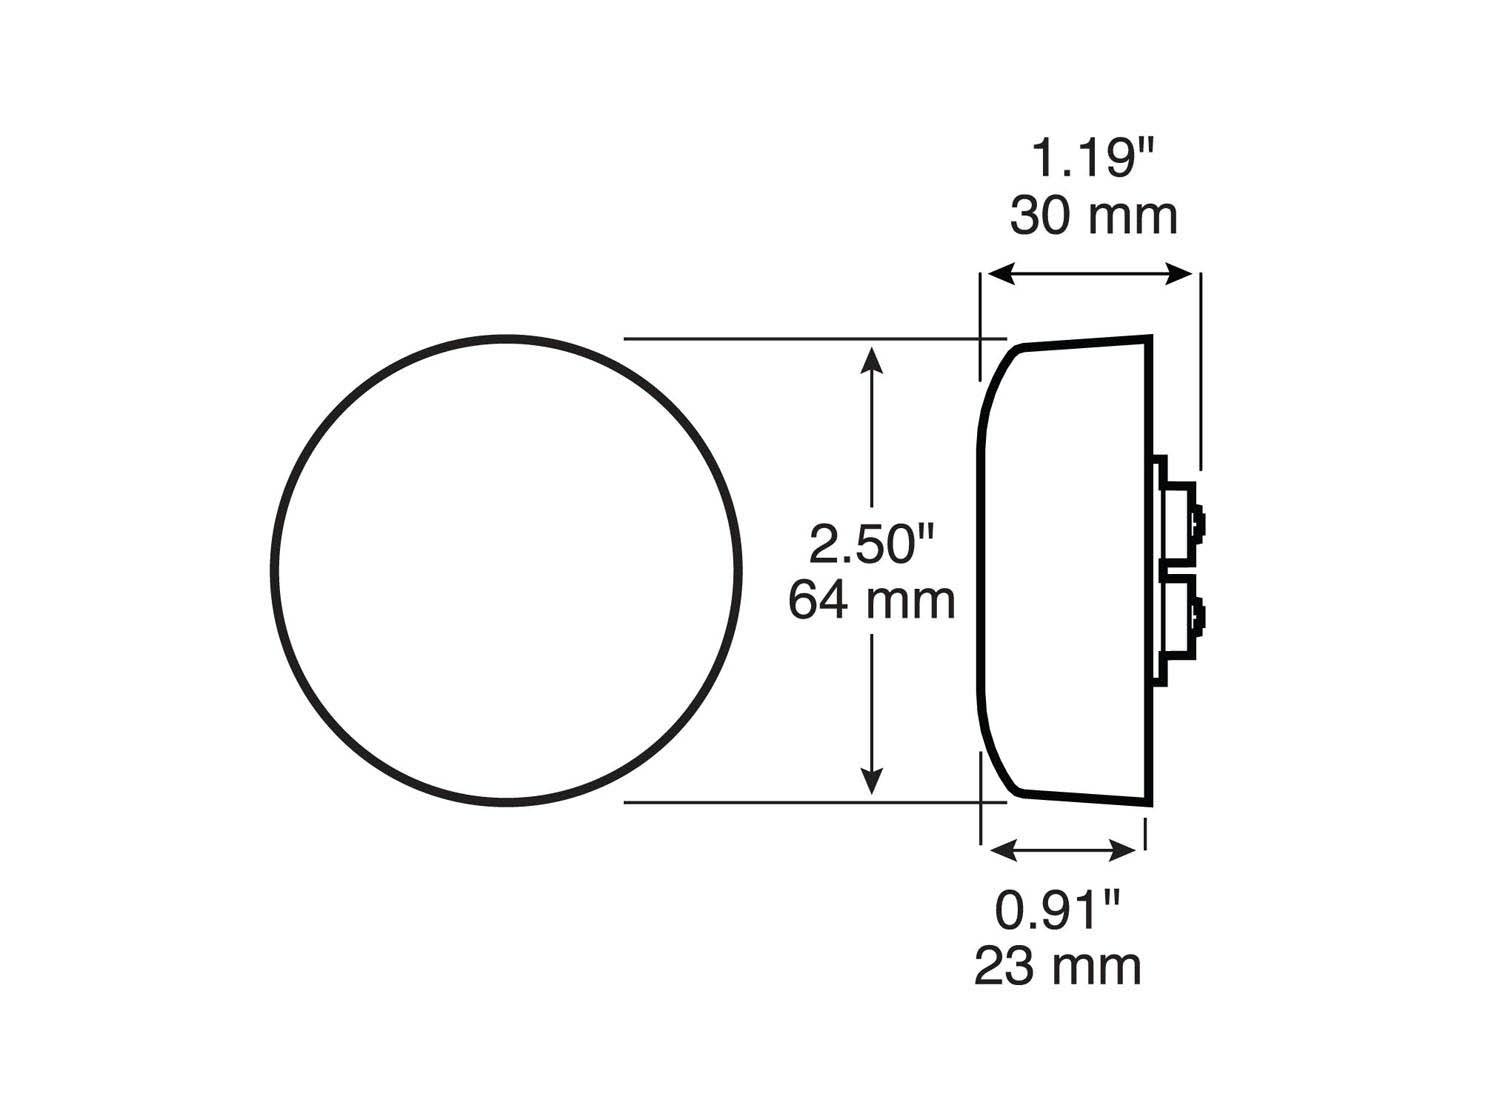 LED Marker/ Clearance, PC-Rated, Round, Kit, 2.5", amber (Pack of 12) - 197_line_dual_2view-BX5-1_433ec441-0bb0-4d20-8315-dff35221cca6